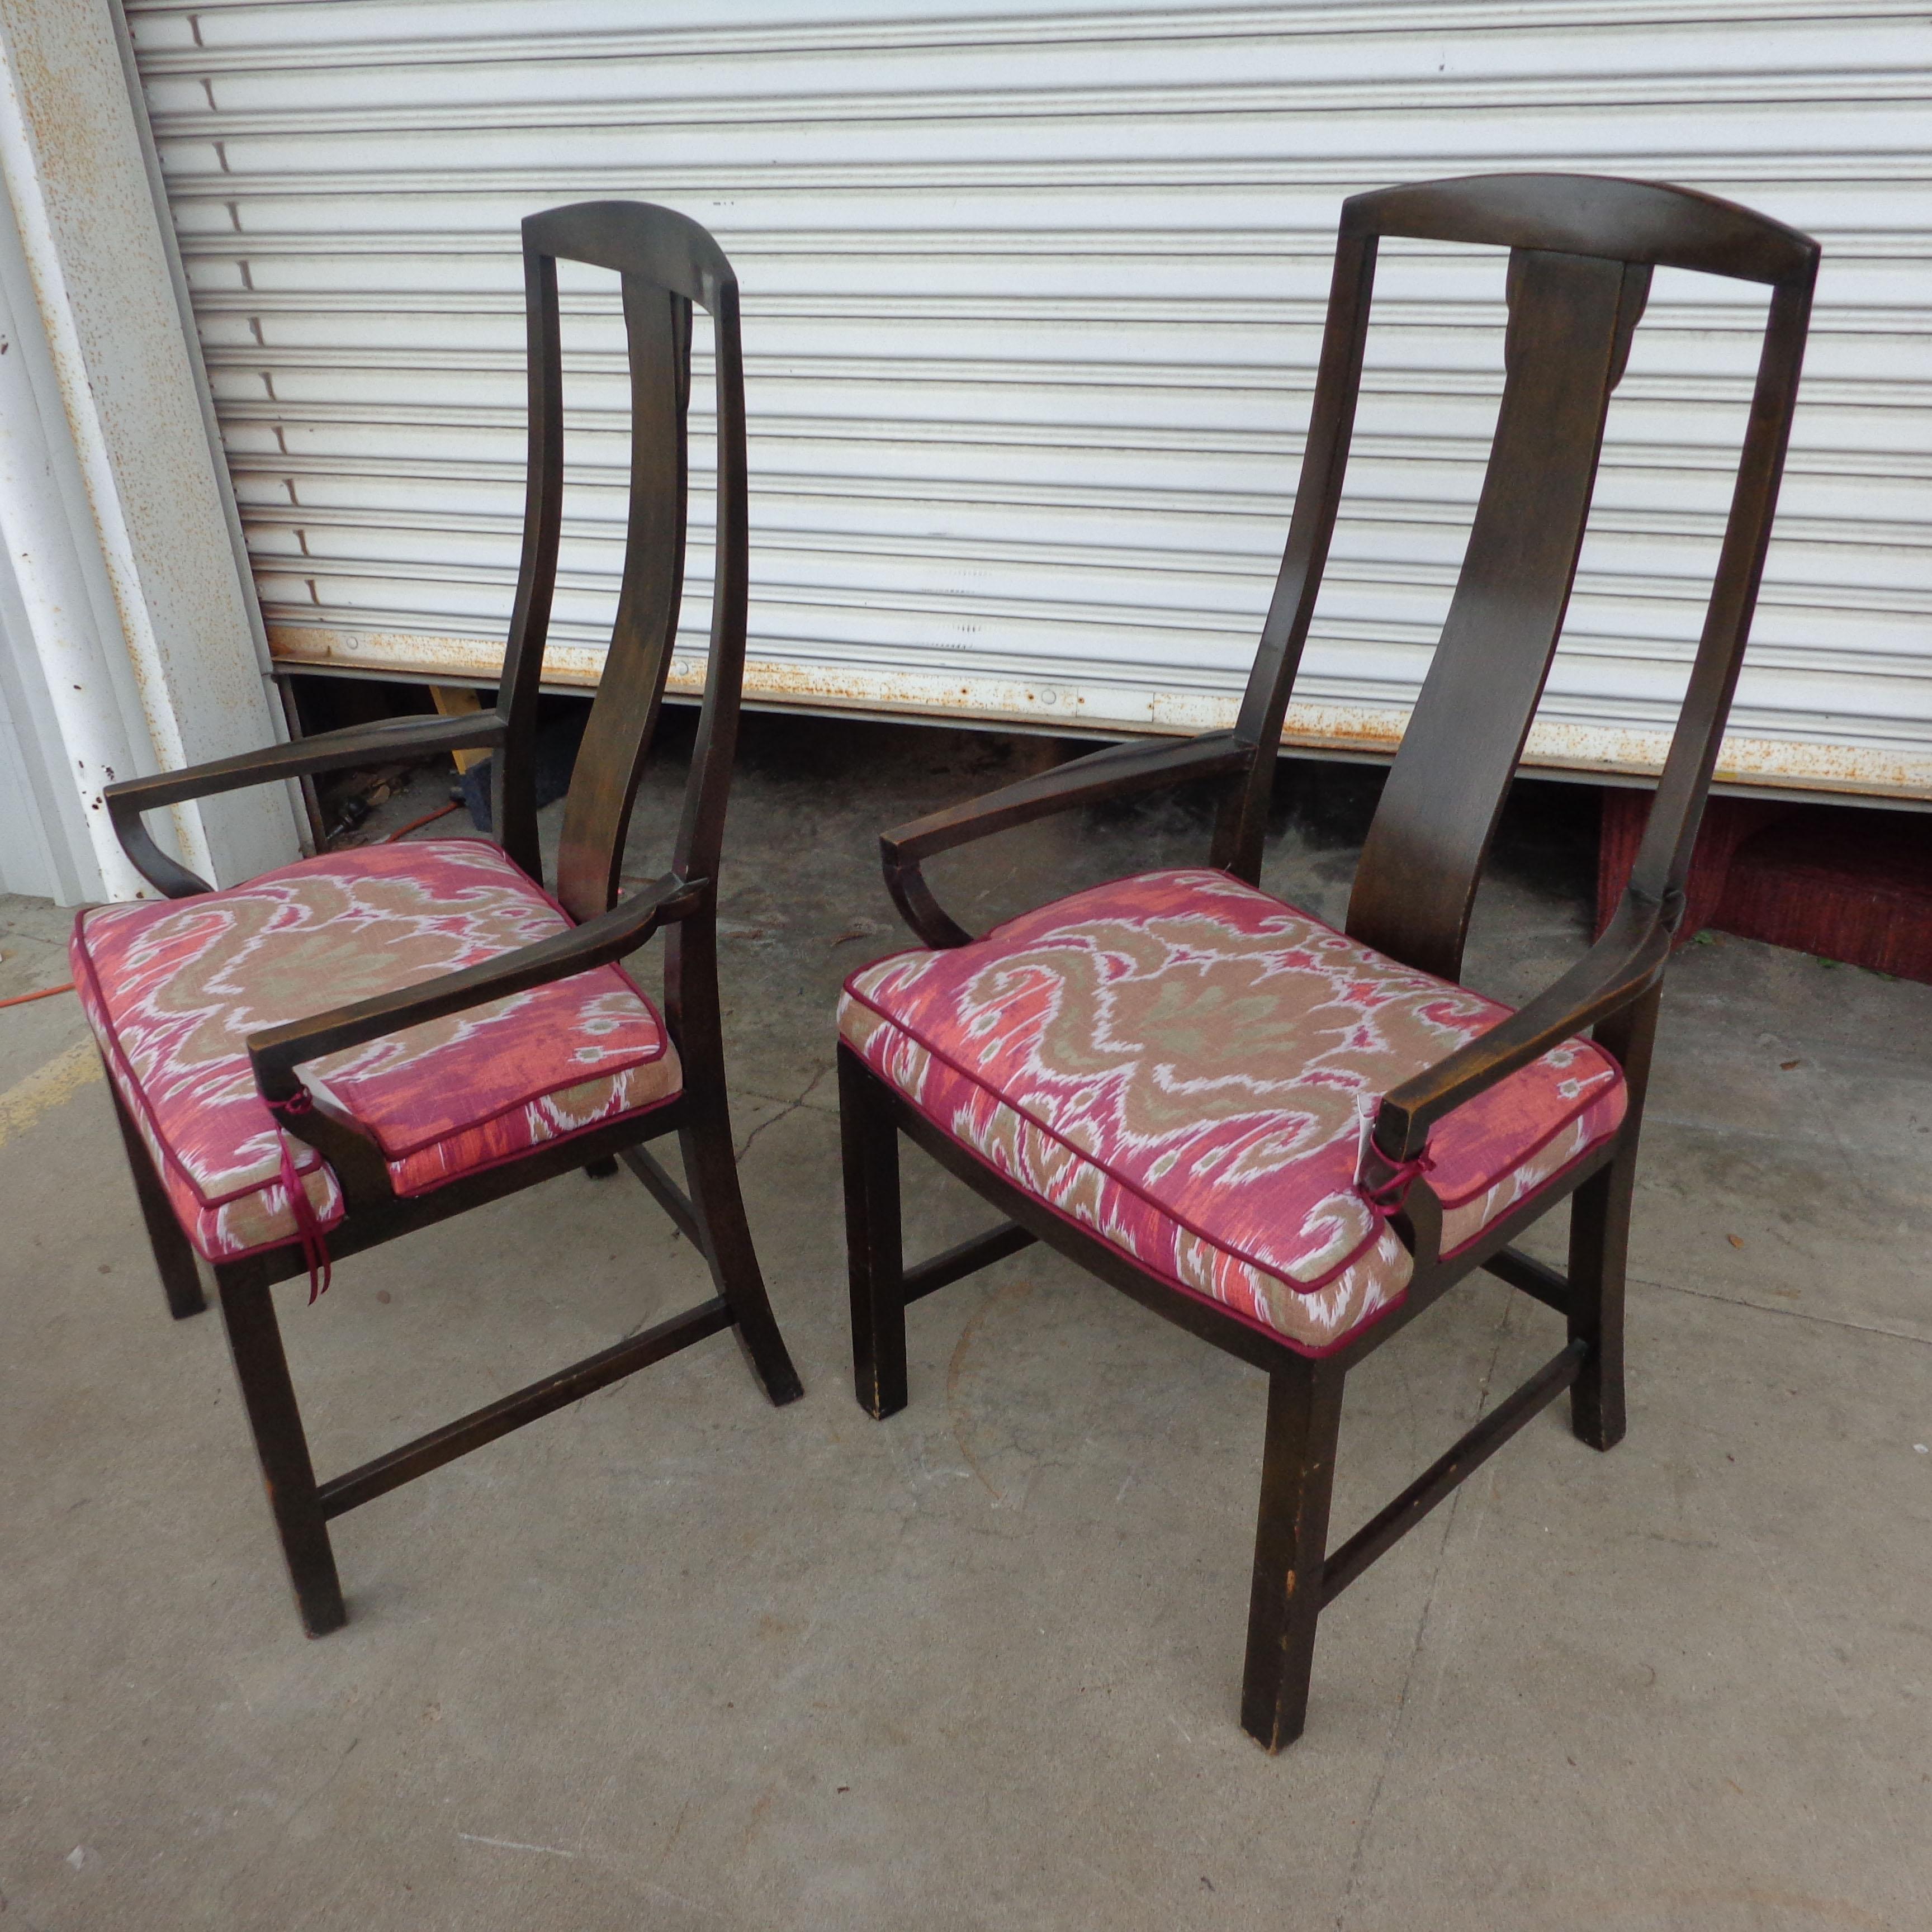 Set of Baker dining chairs

Dark walnut consisting of 4 arm and 2 side chairs reupholstered in a bright Ikat print.

Measures: Seat height 18.5